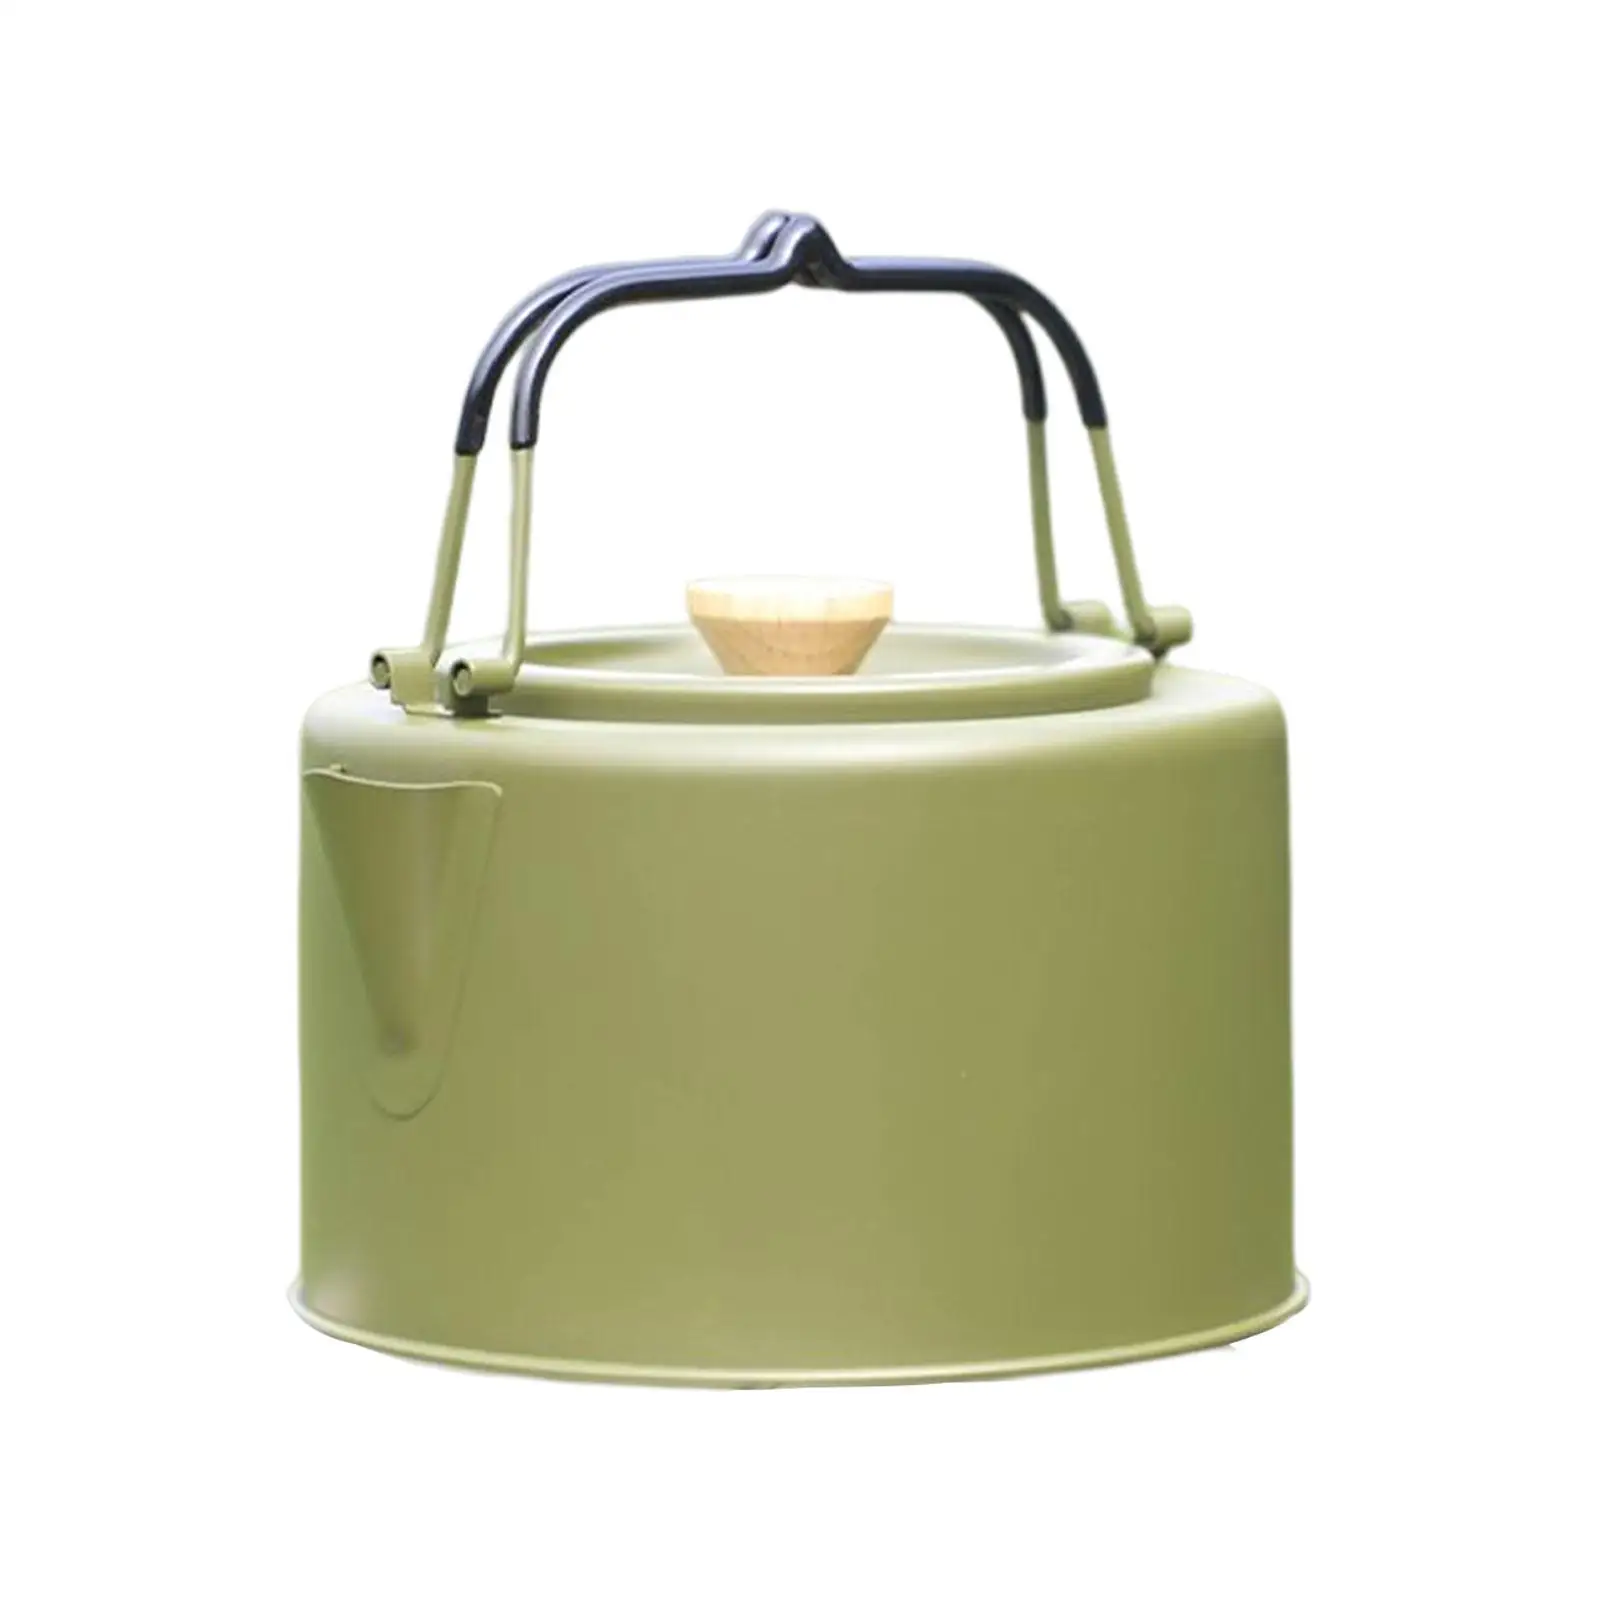 Stainless Steel Camping Tea Kettle Teapot with Lid Outdoor Kettle 1L Kettle Campfire Kettle Coffee Pot for Backpacking Picnic